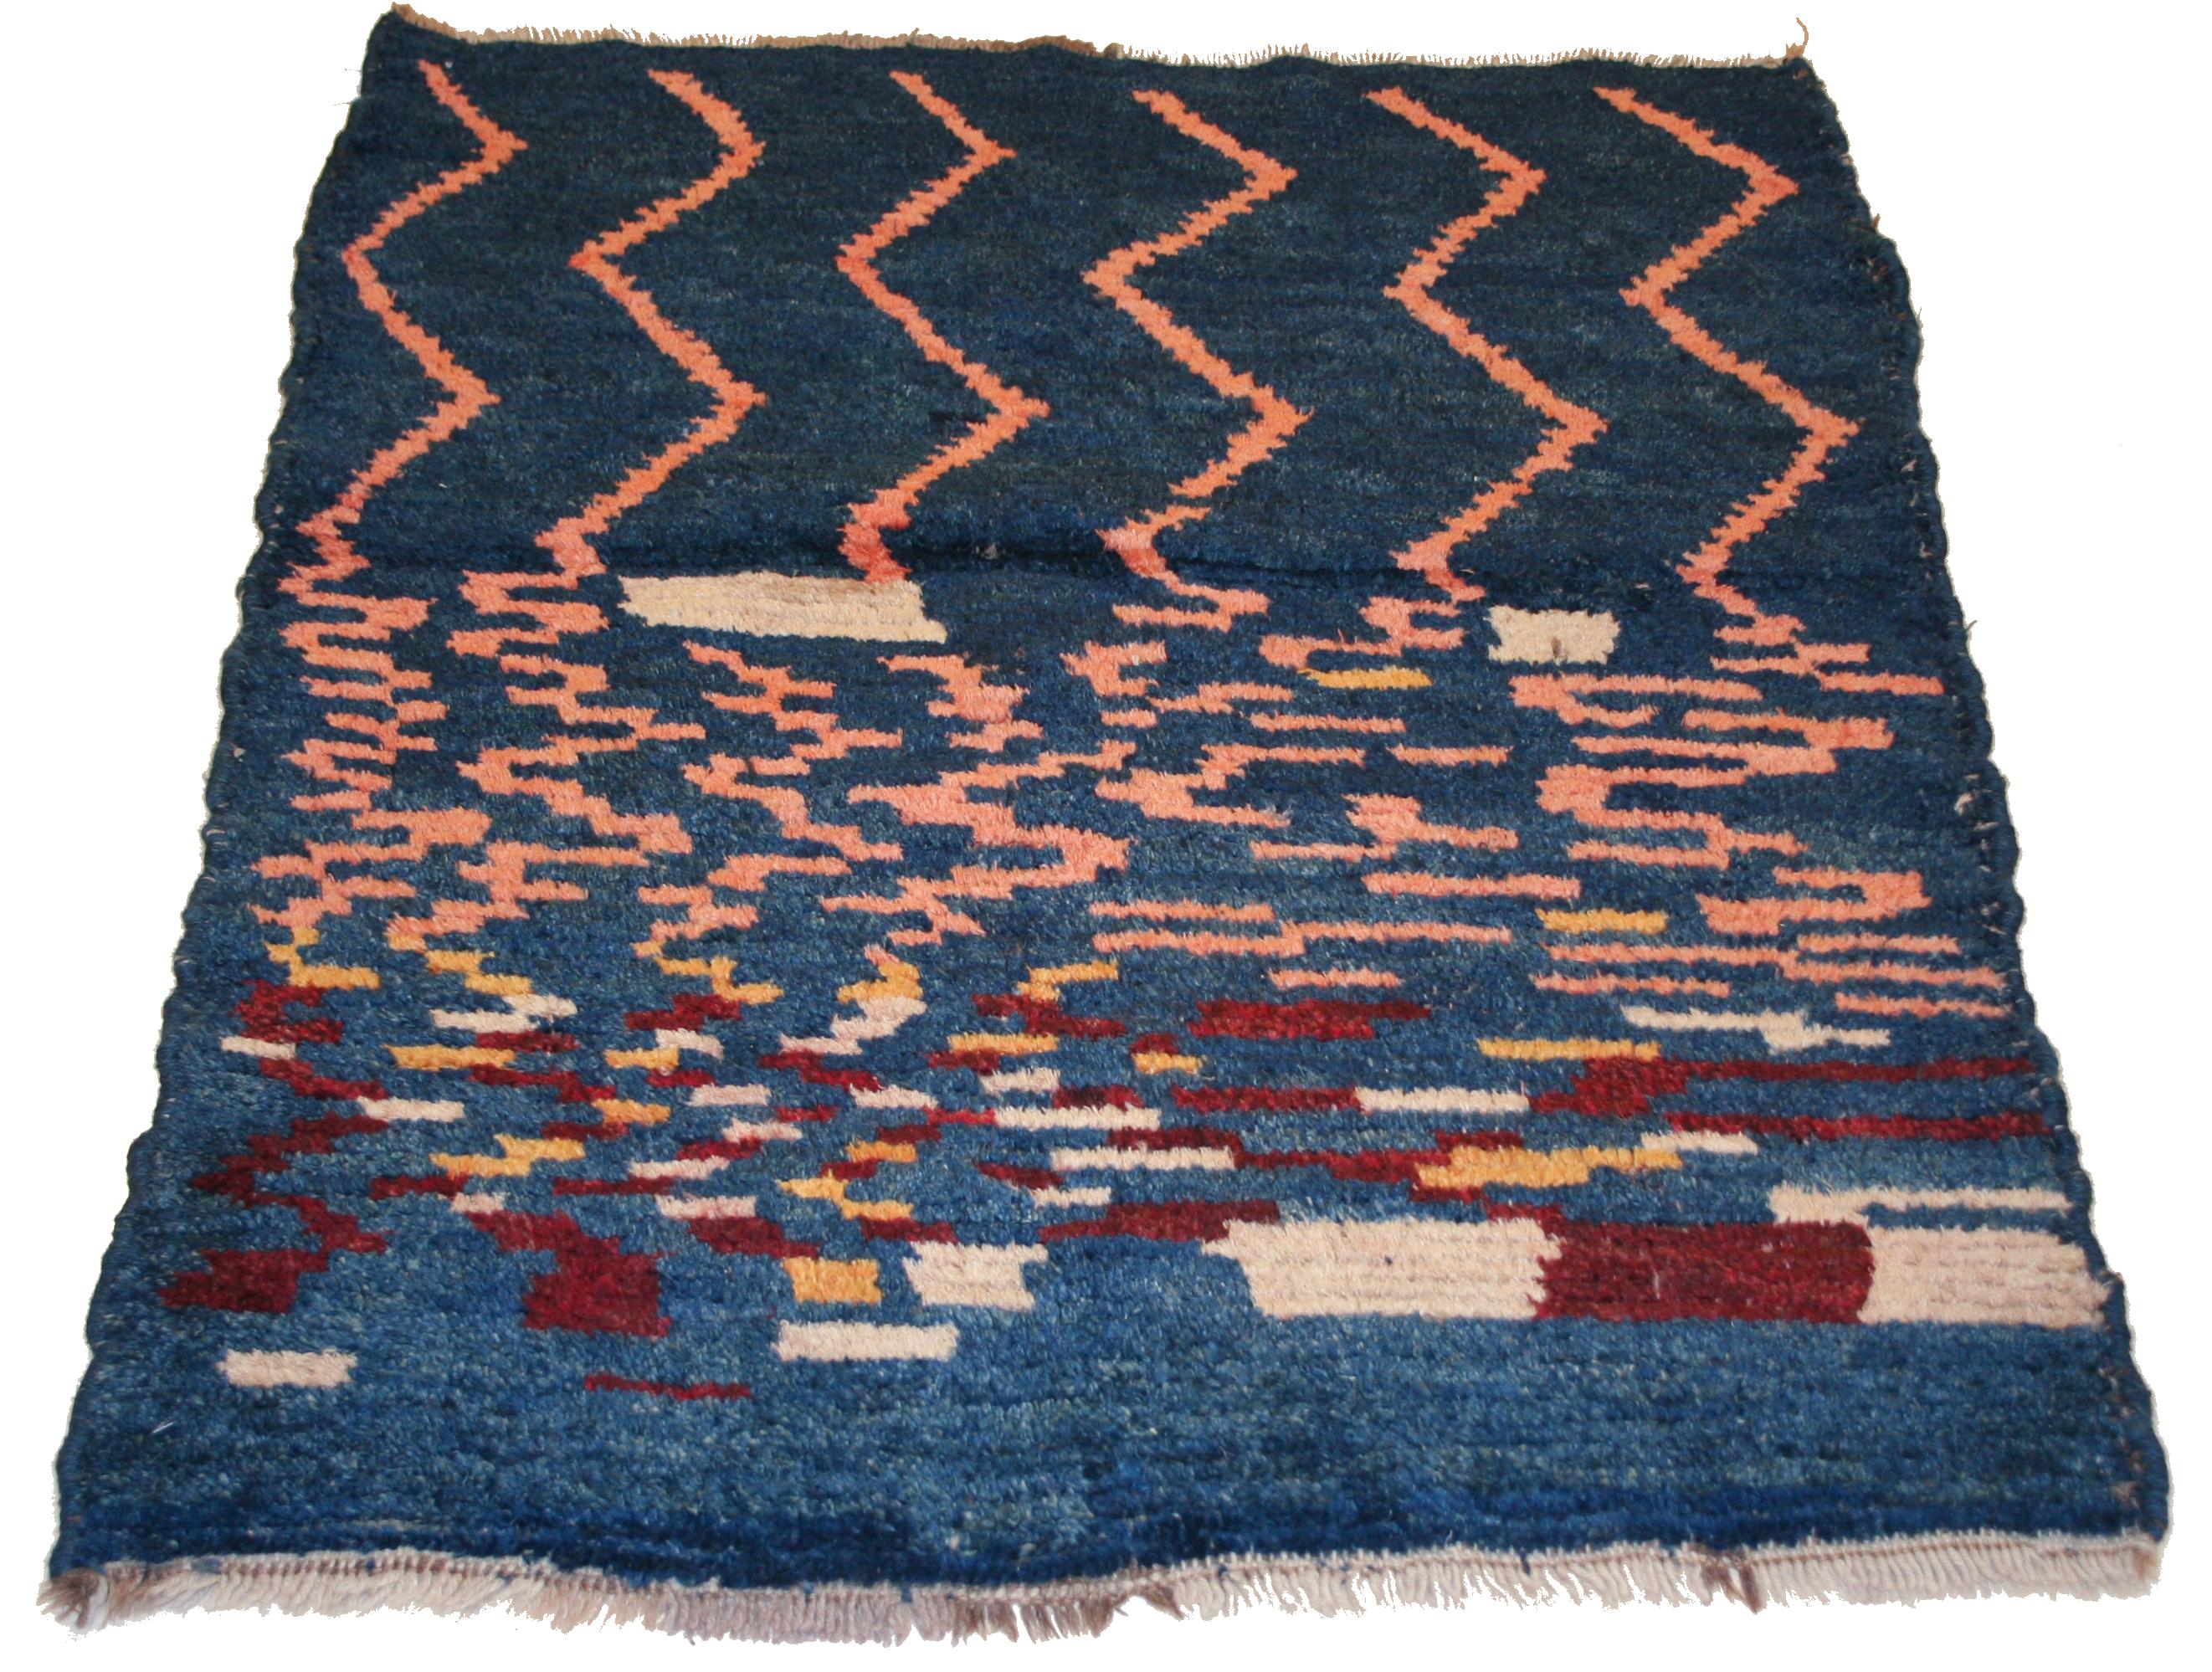 A charming small tribal rug distinguished by a pattern which starts out as a group of parallel vertical zig zag elements which suddenly break down in smaller units until they seem to almost dissolve and evolve into a naively drawn checkerboard